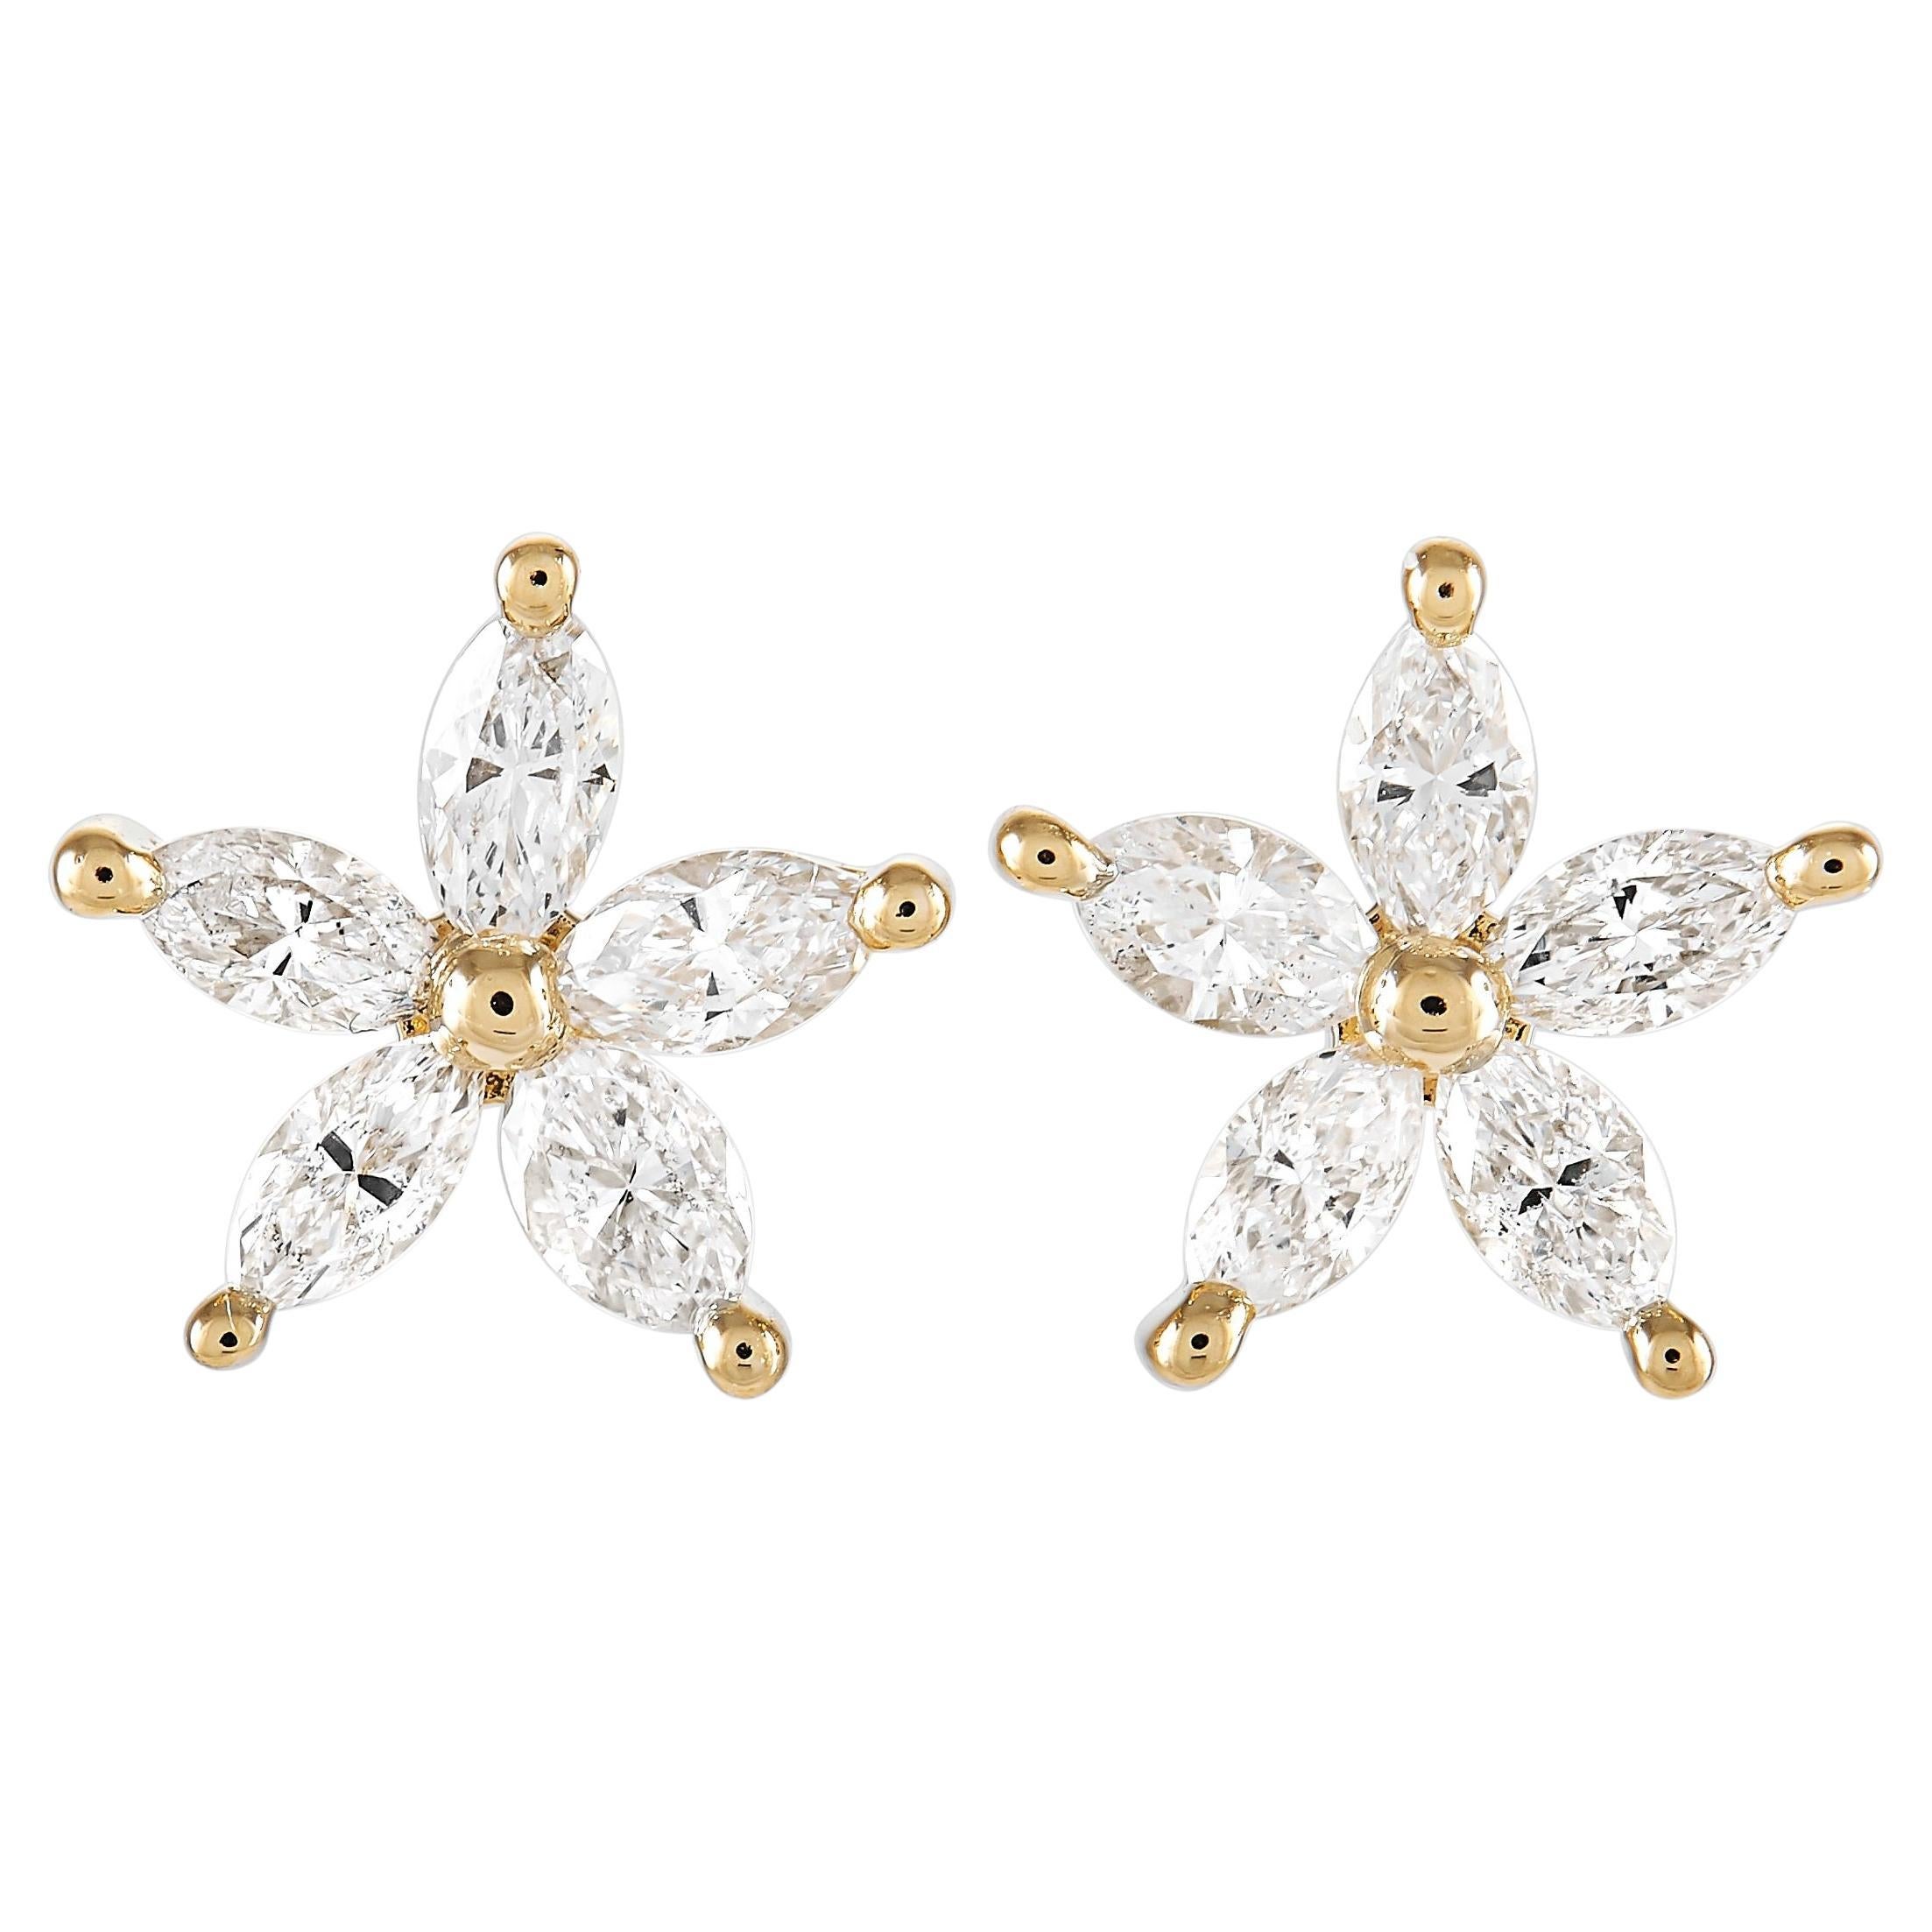 LB Exclusive 18K White and Yellow Gold 2.95 ct Diamond Earrings For ...